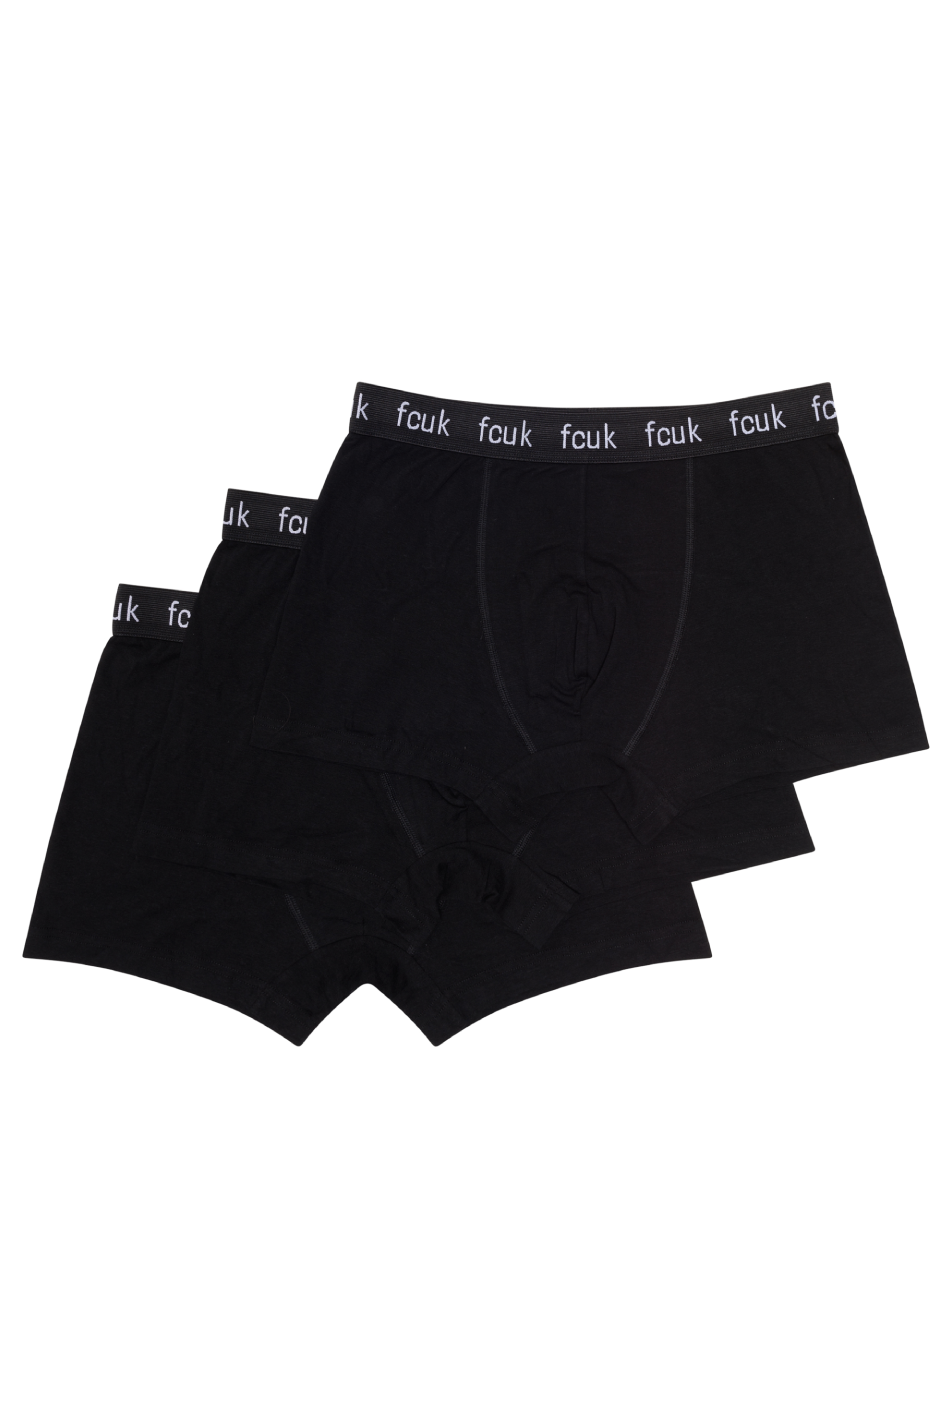 French Connection 3 Pack Men's Boxer